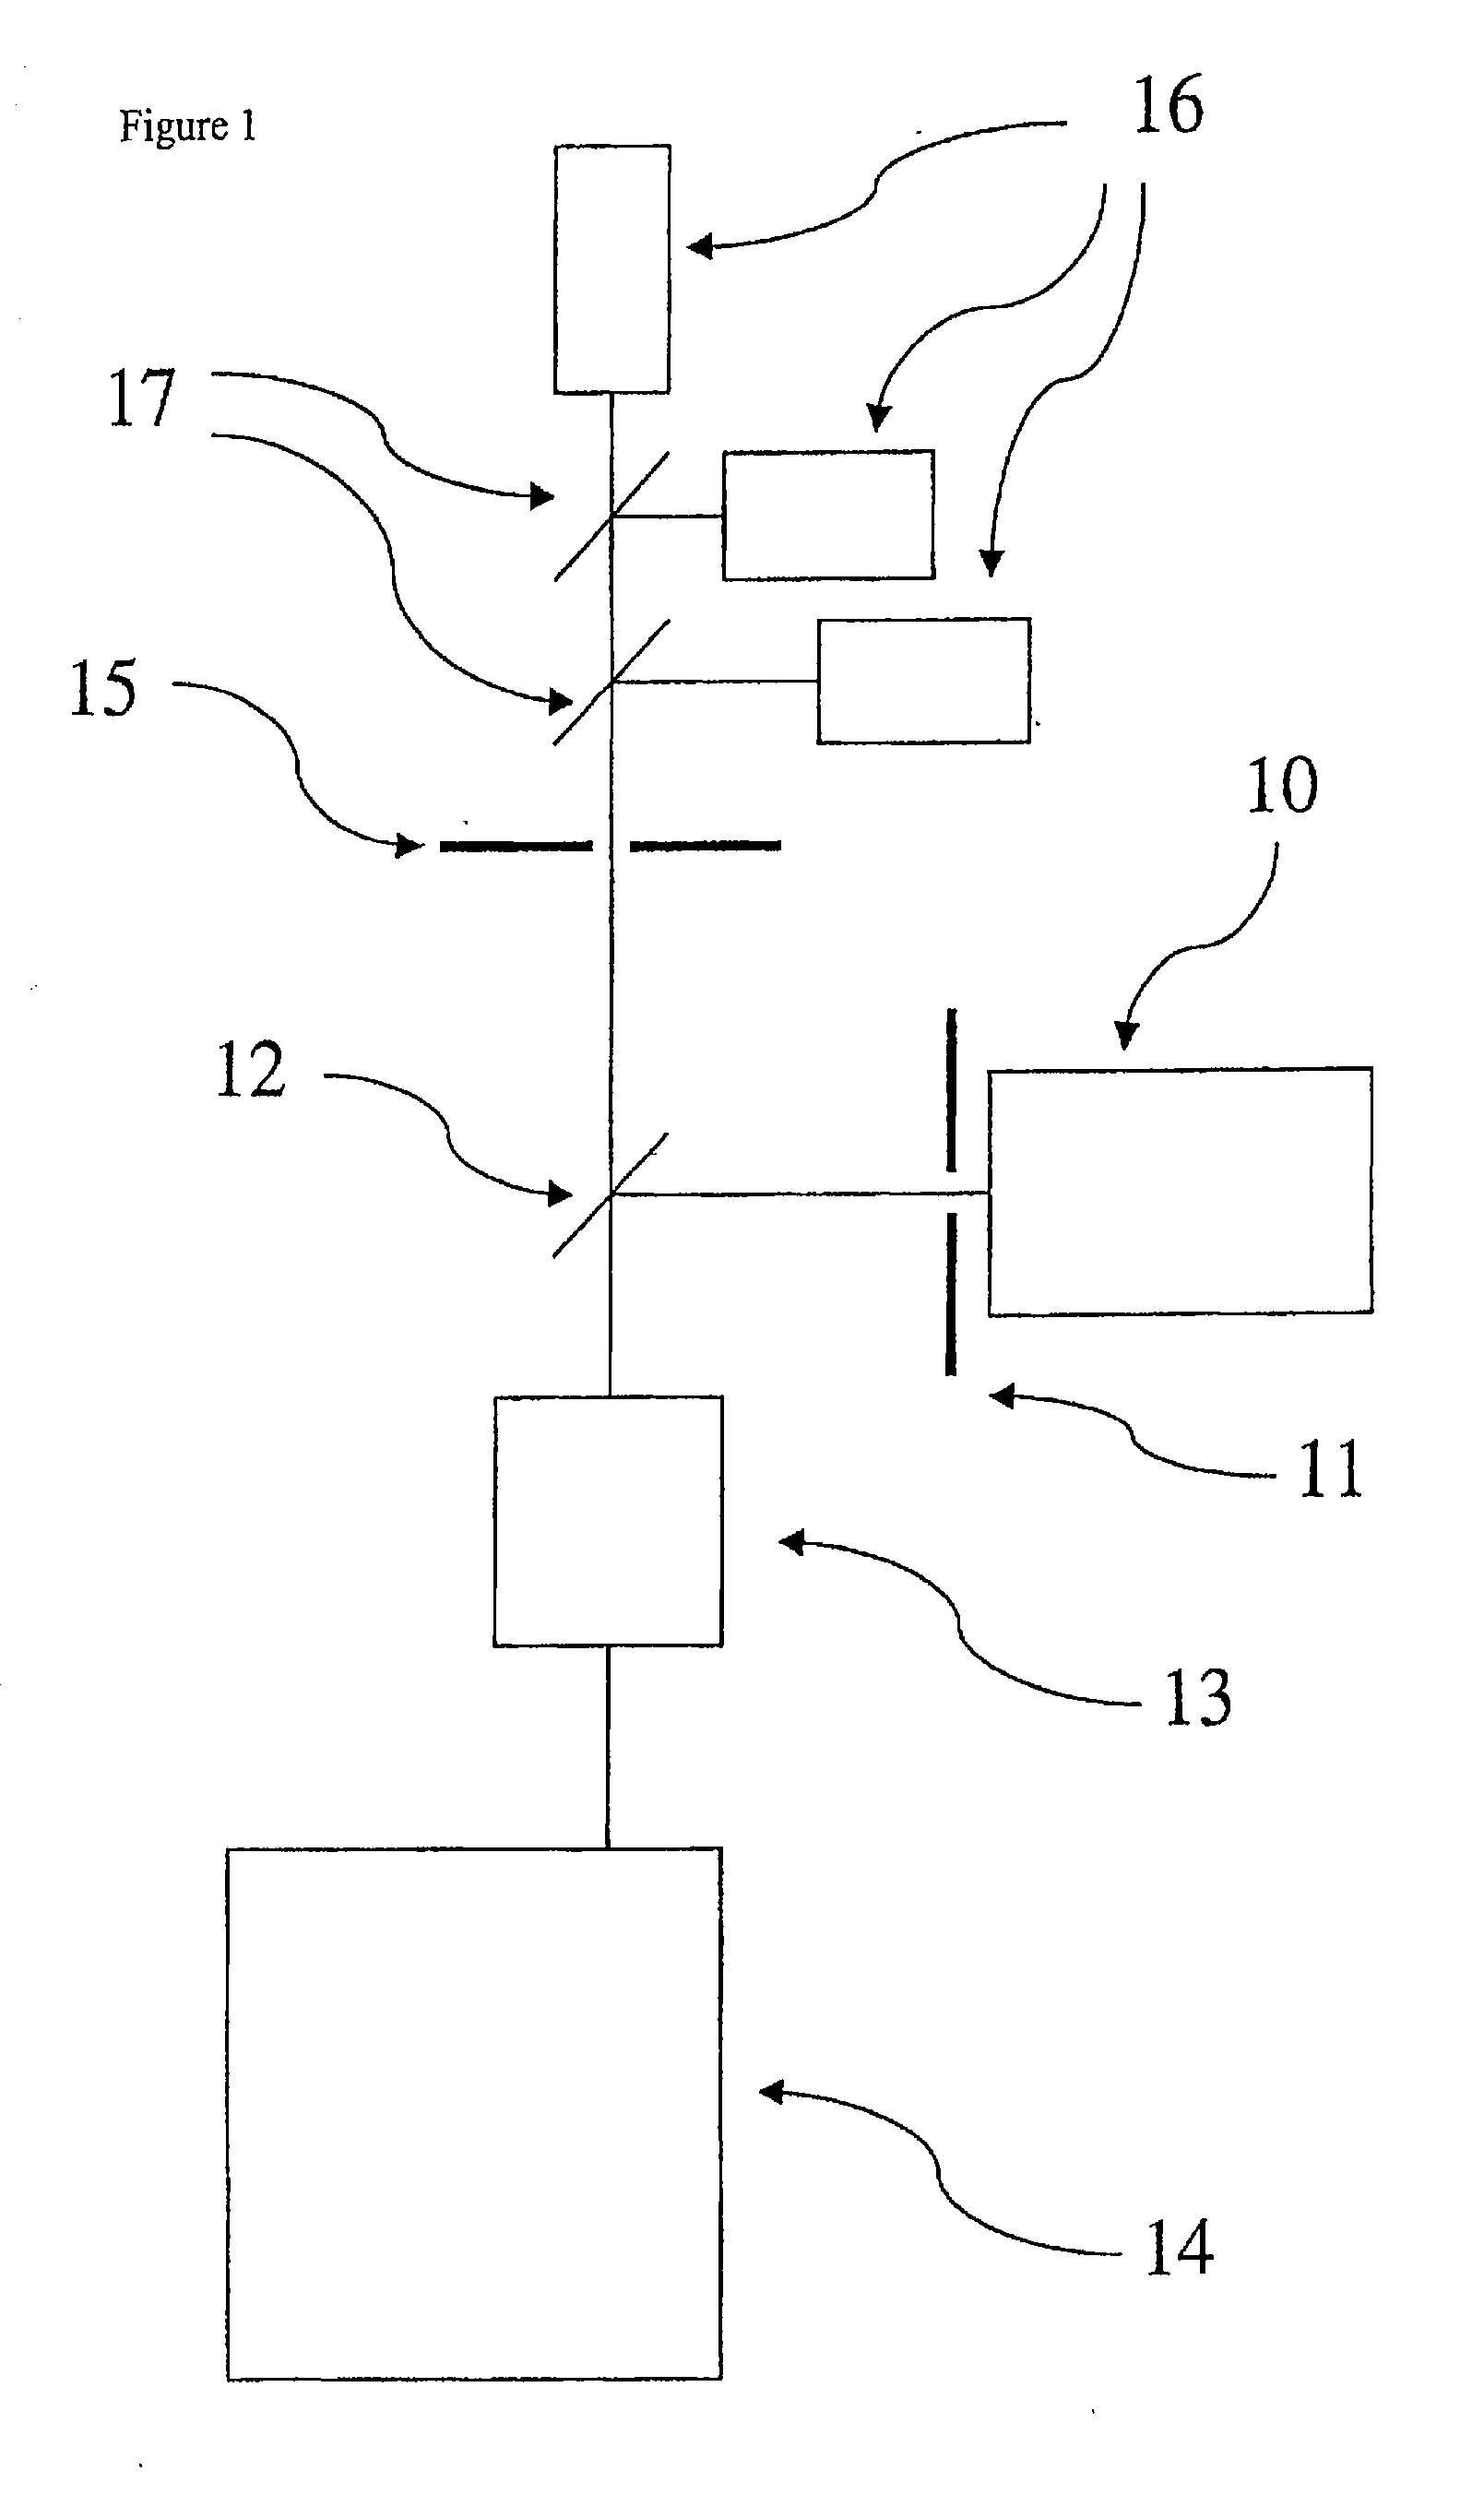 Interference microscope, and method for operating an interference microscope